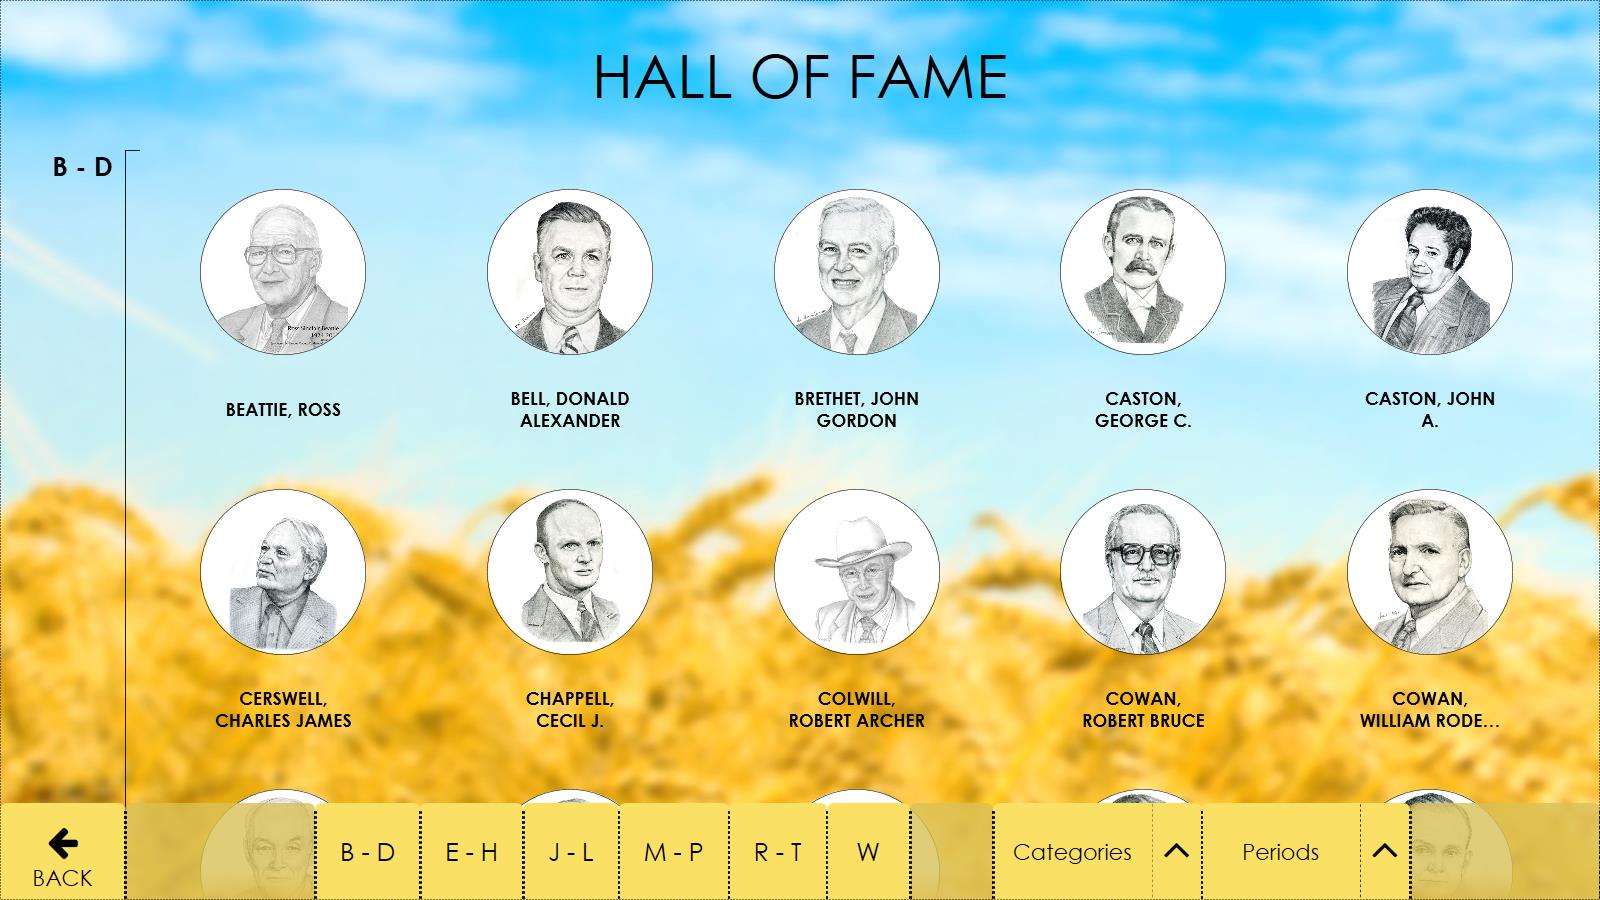 Interactive Hall of fame application